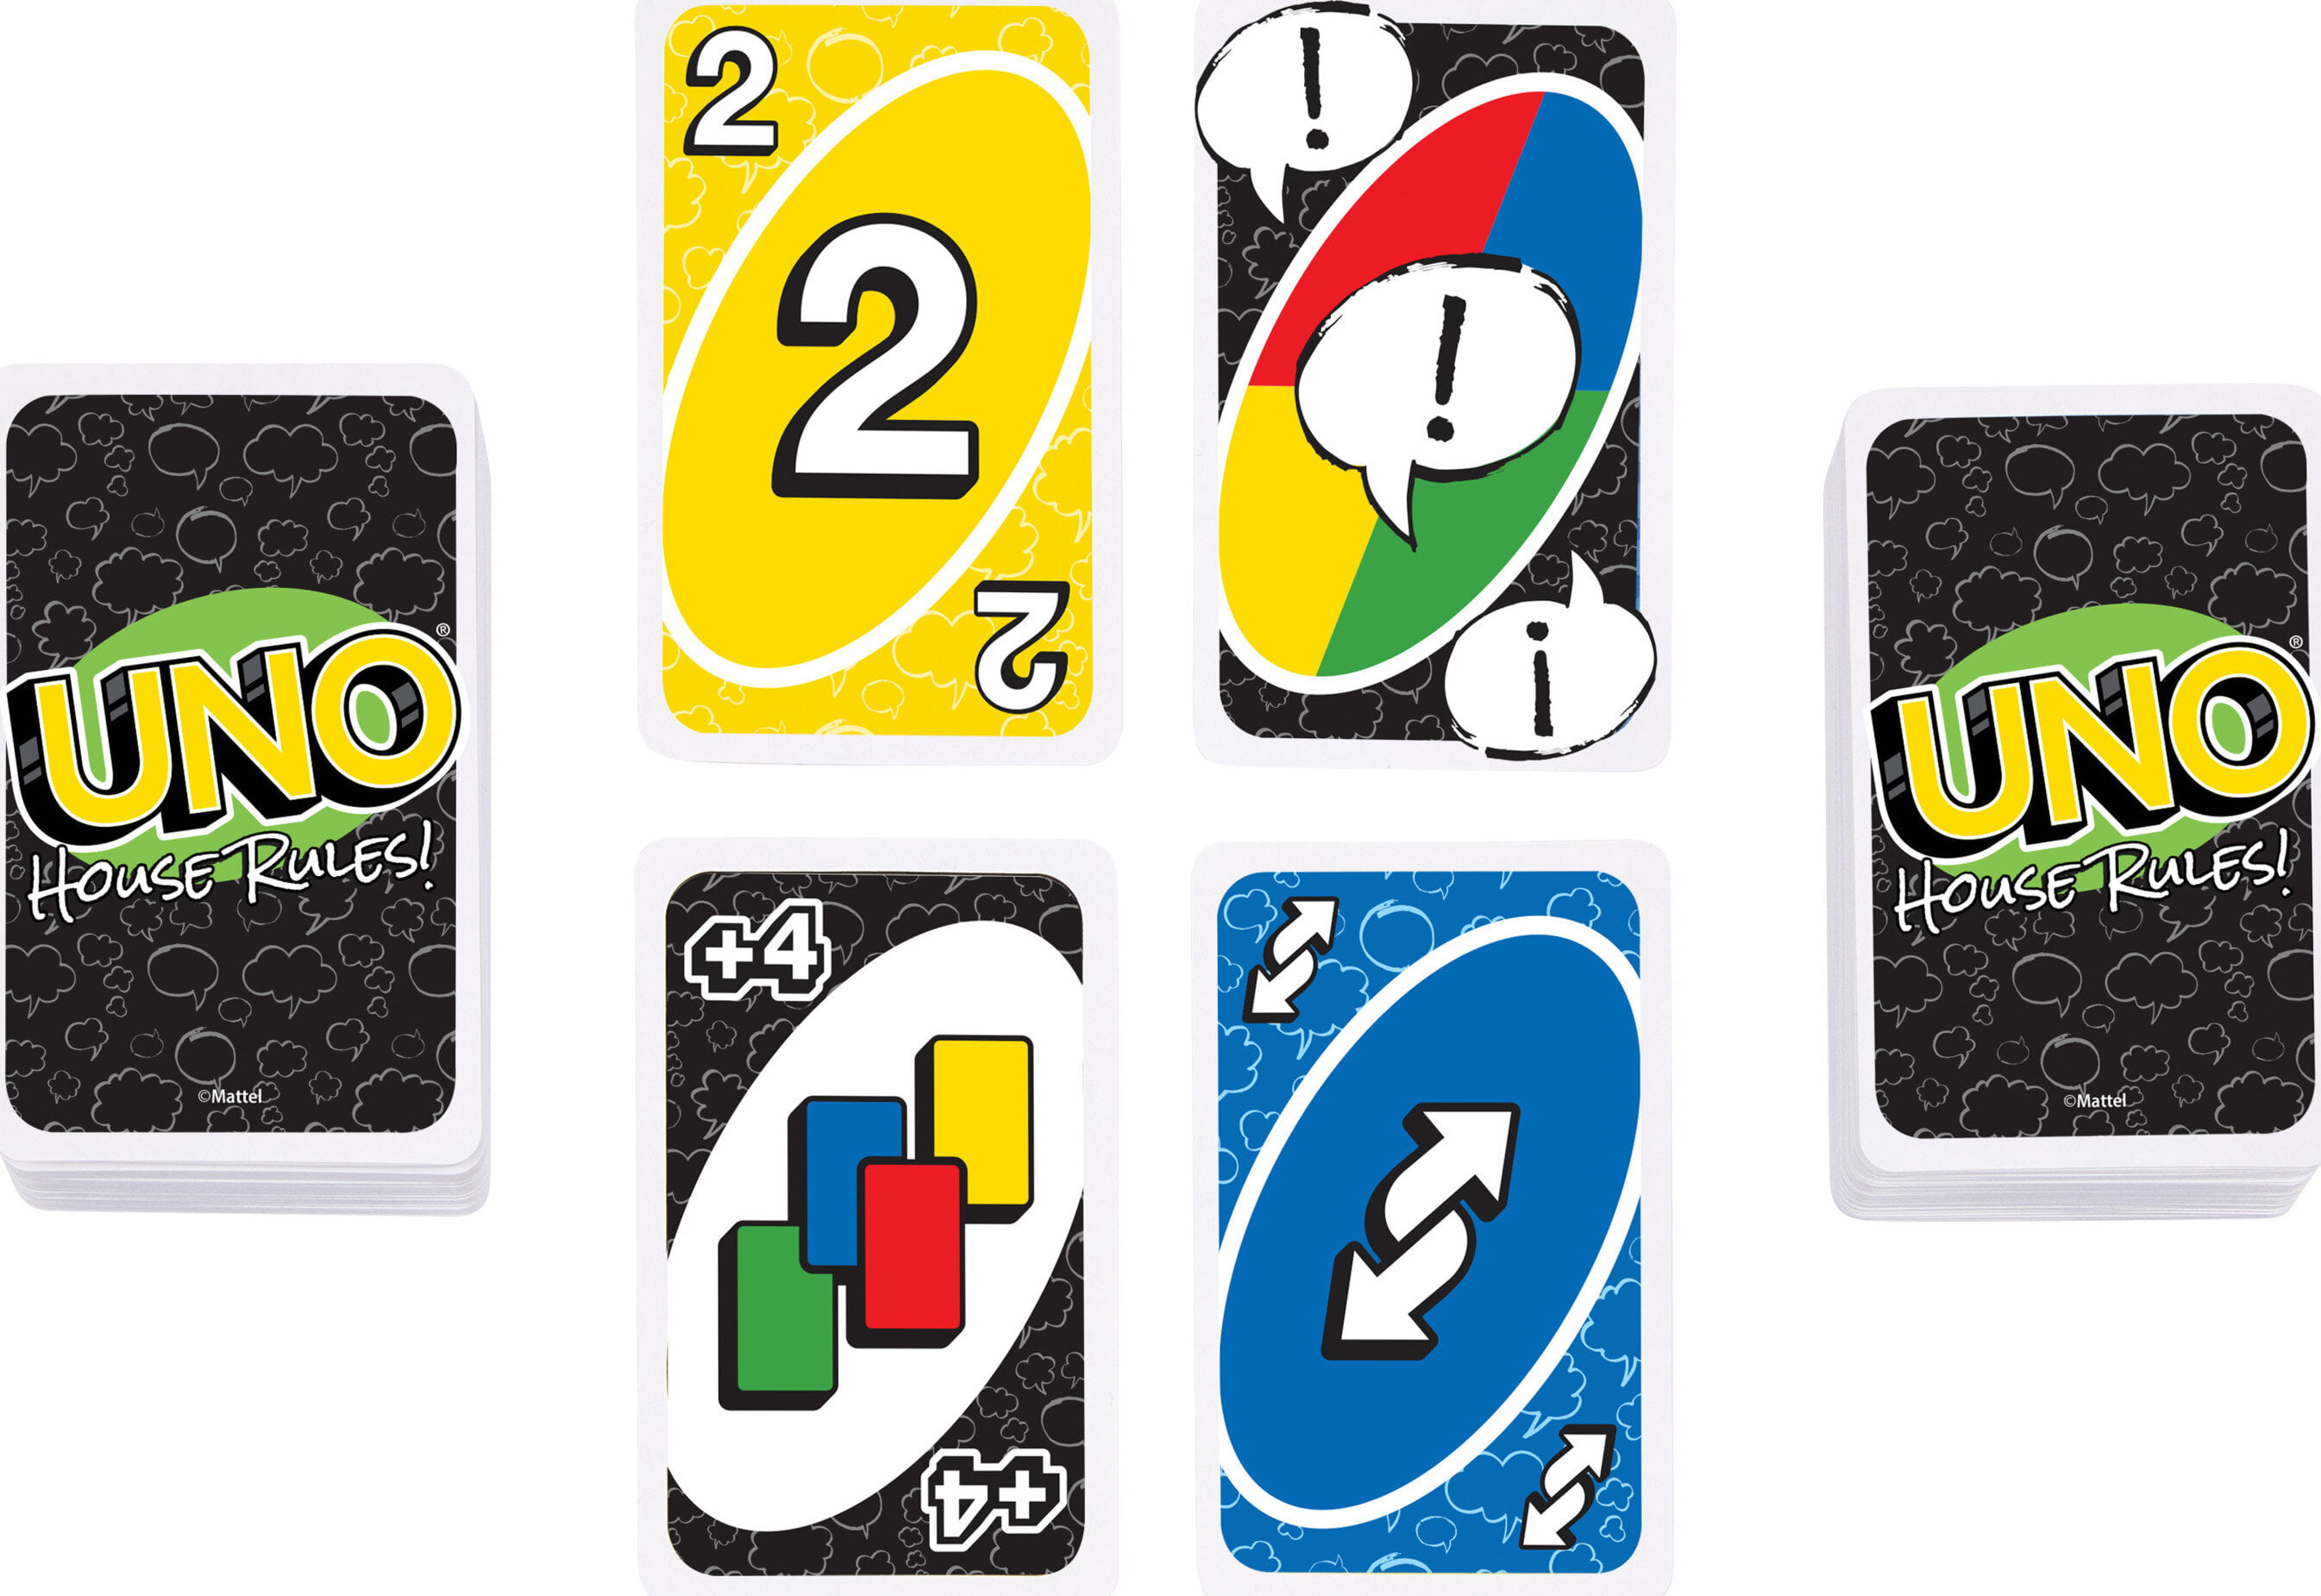 Uno Throwdown: New rules in the house